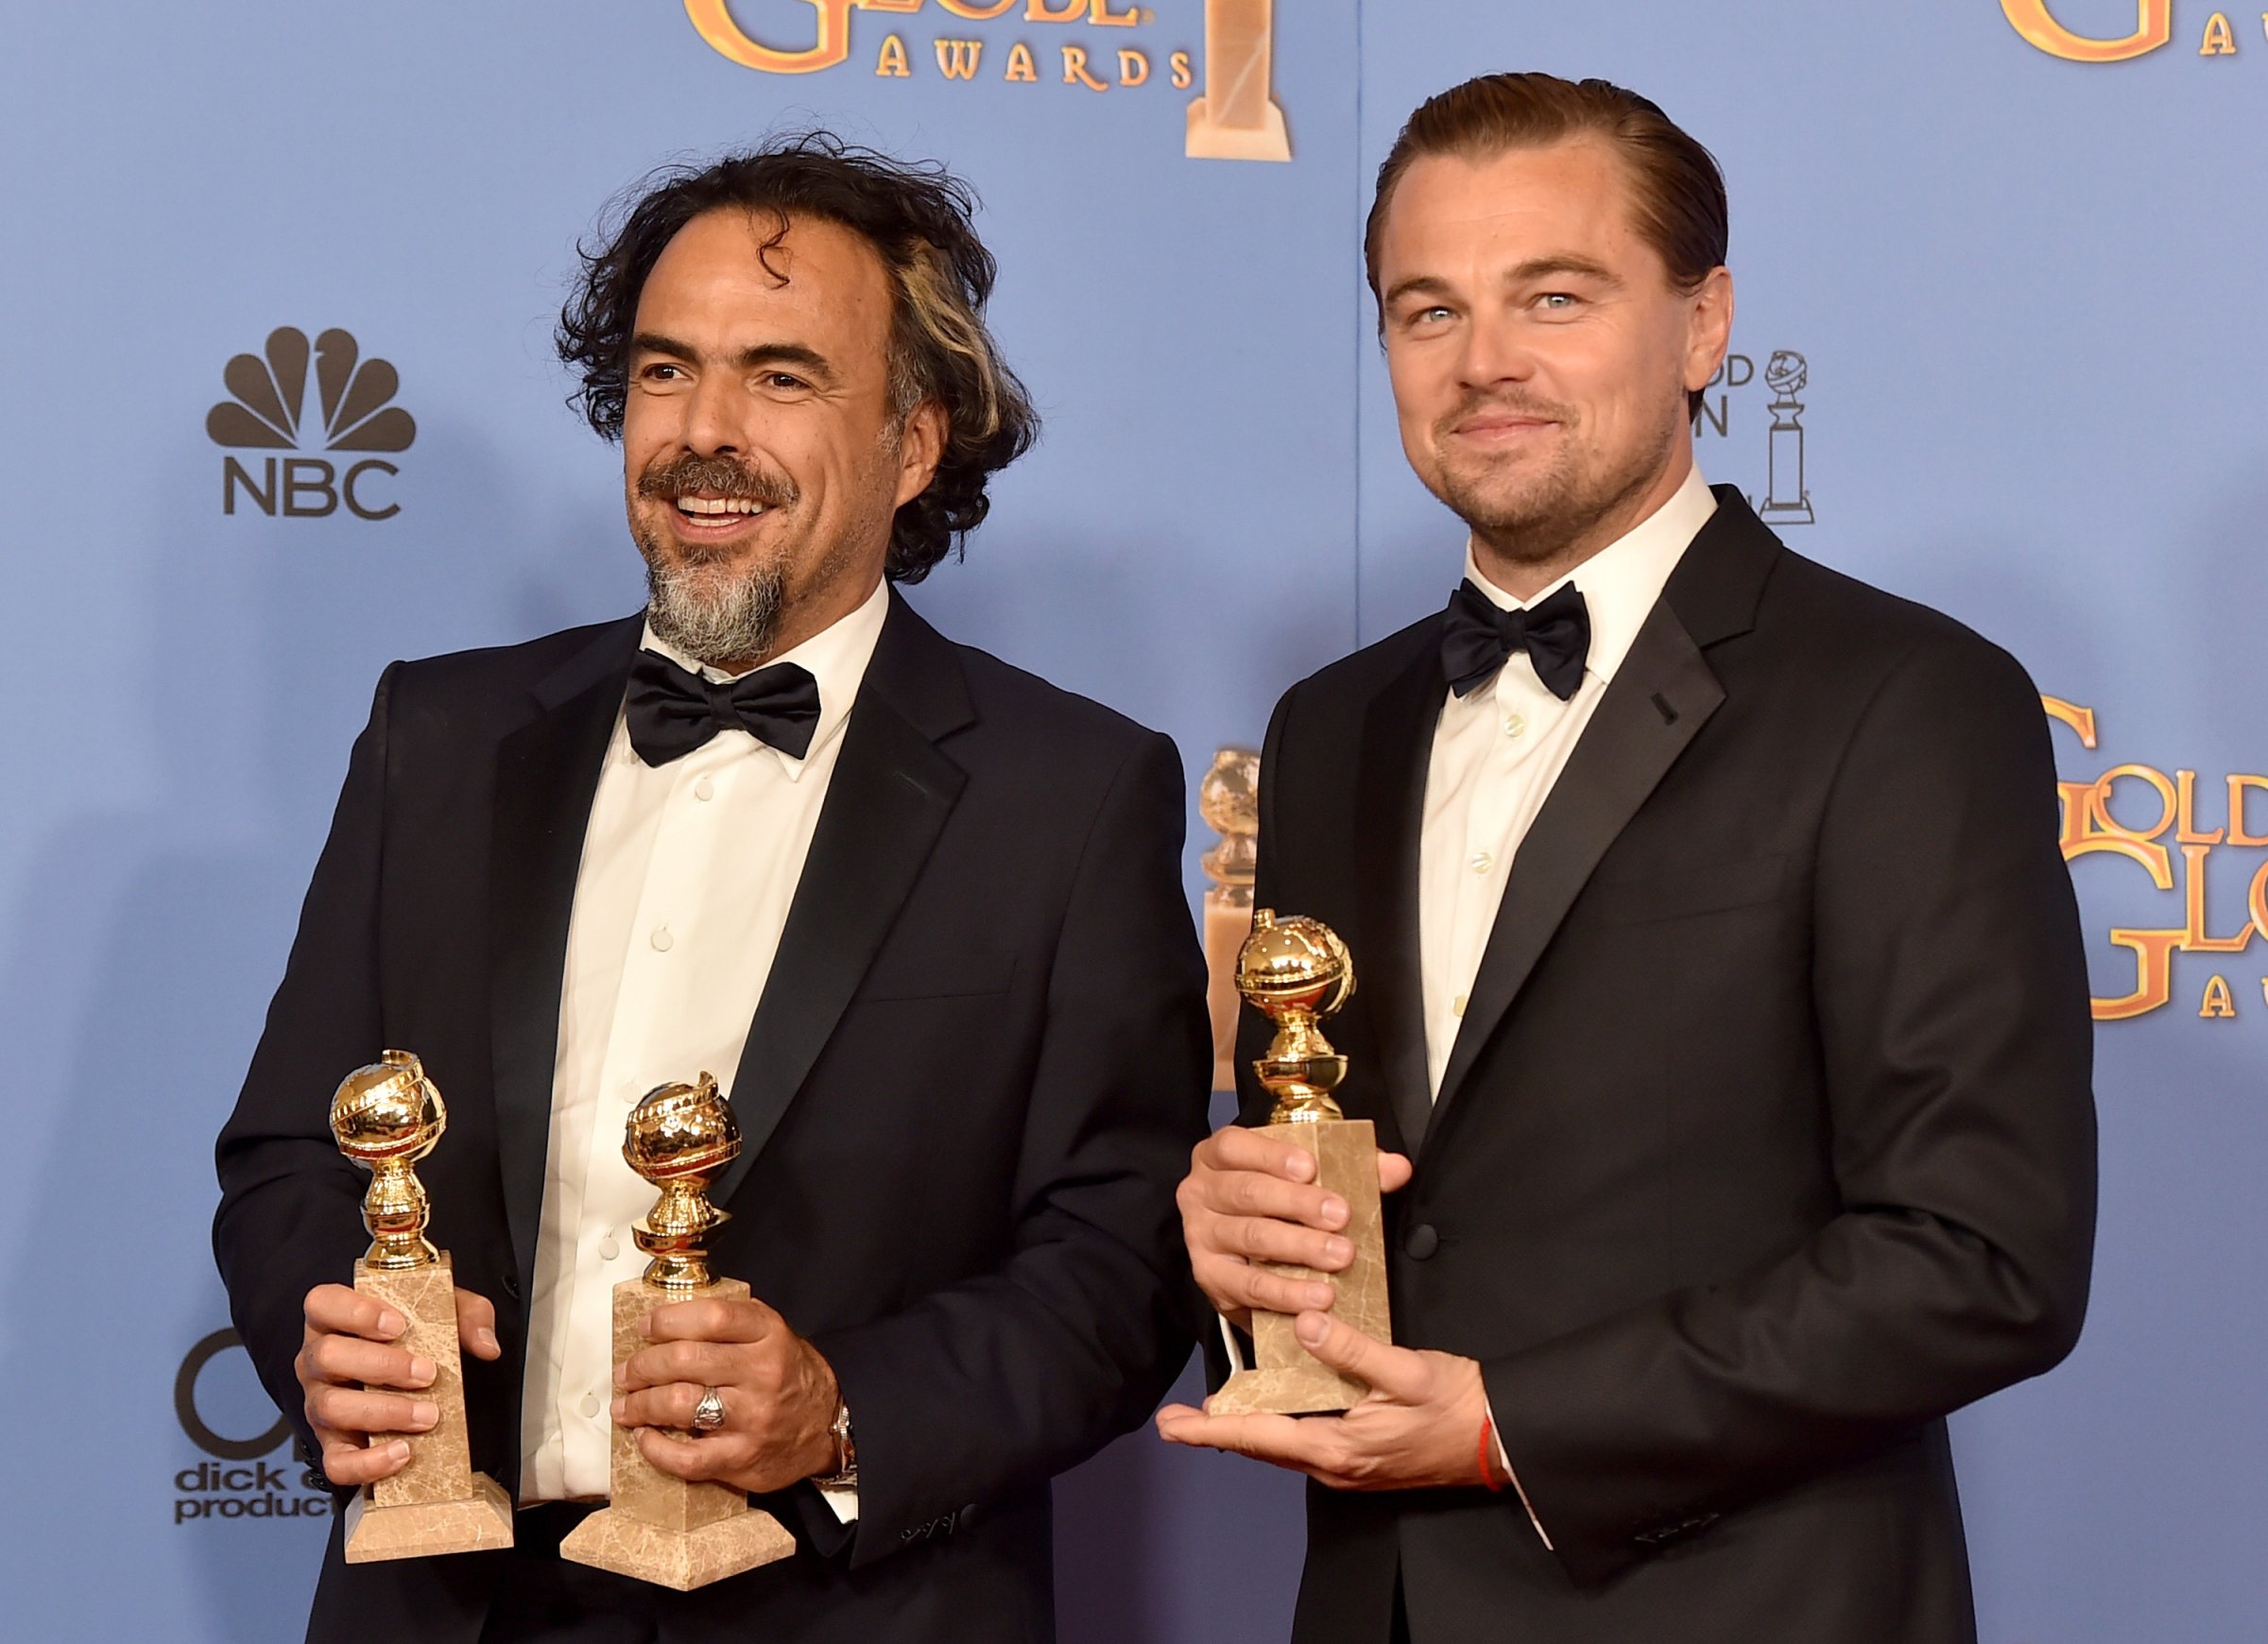 From left: Director Alejandro Gonzalez Inarritu and Leonardo DiCaprio during the 73rd Annual Golden Globe Awards on Jan. 10, 2016 in Beverly Hills.